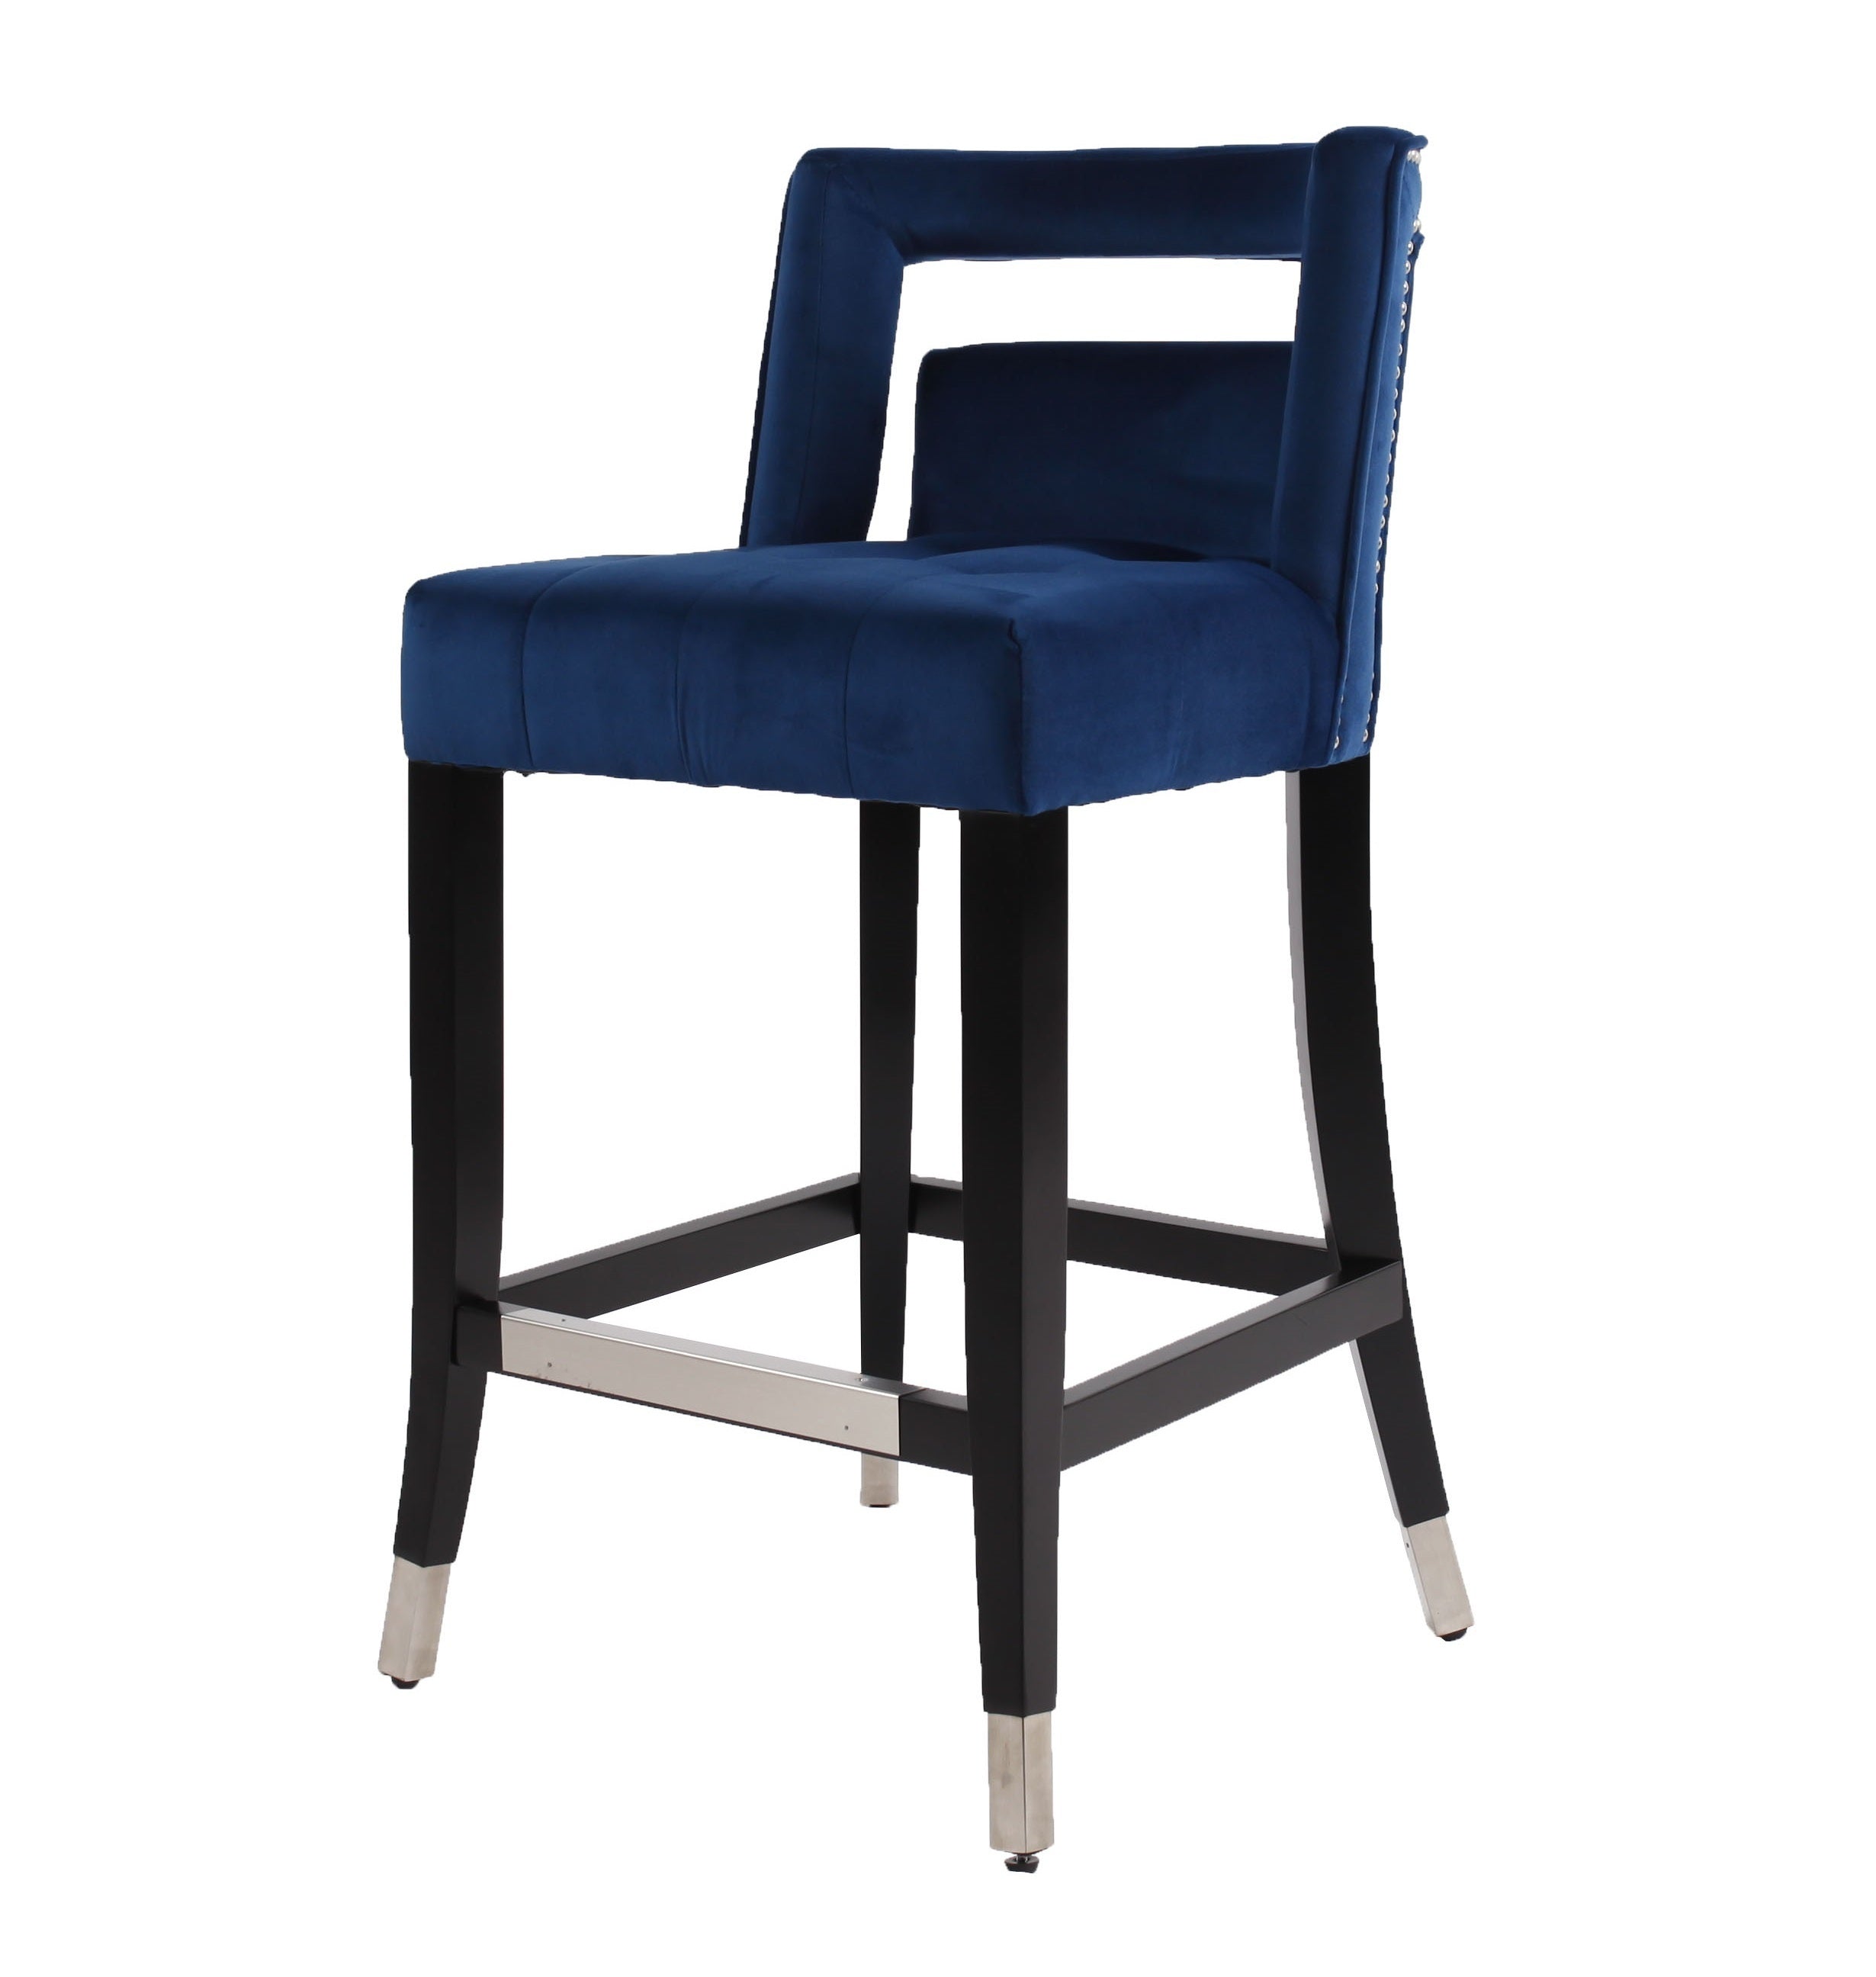 Suede Velvet Barstool with nailheads 26 inch Seater height (Set of 2) - Navy Blue